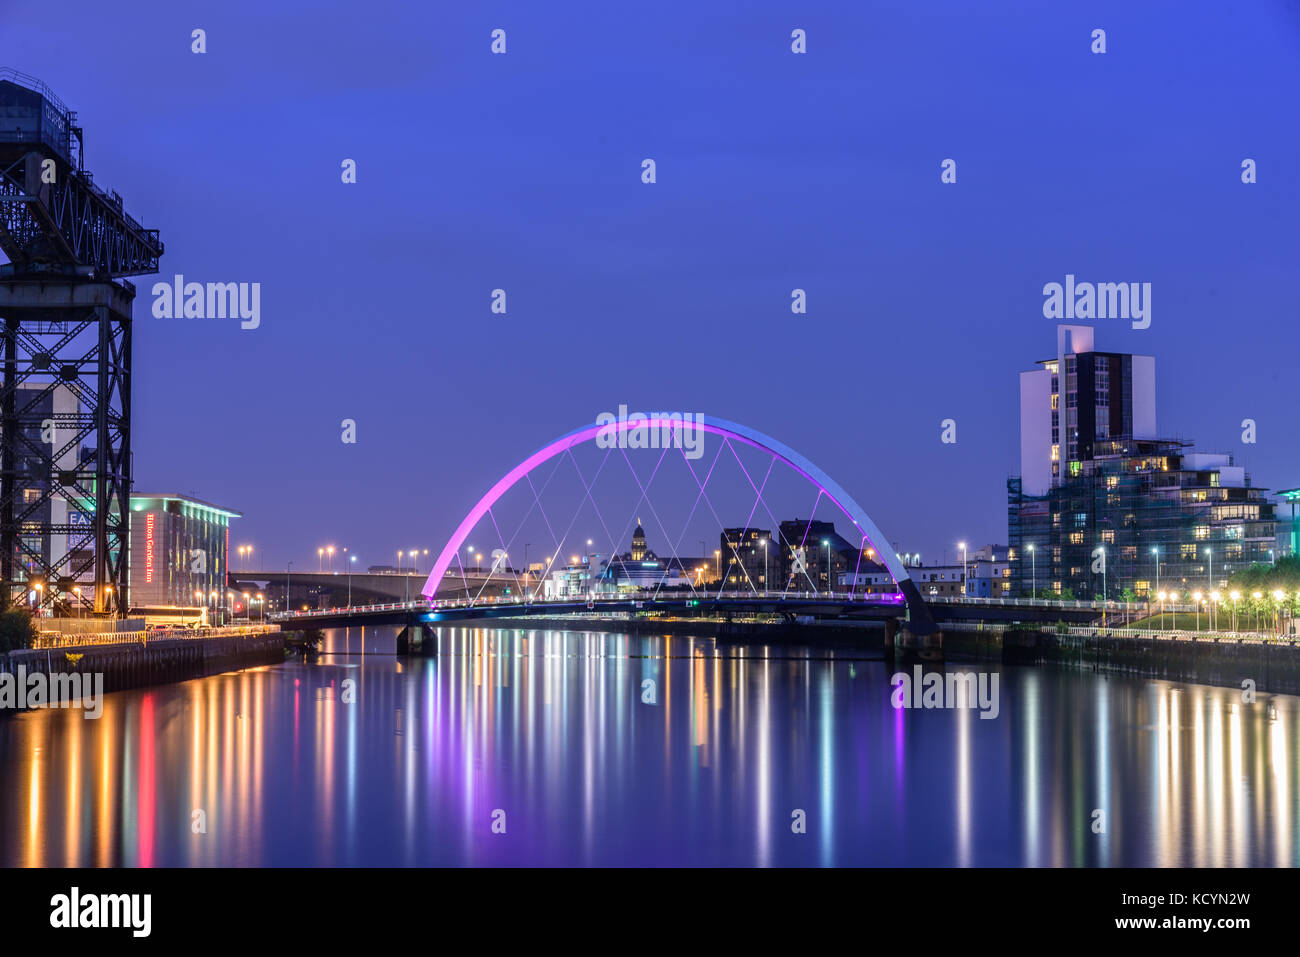 GLASGOW, SCOTLAND - AUGUST 15, 2017 - Night lights and the Clyde Arc Bridge at Glasgow City in Scotland over river. Stock Photo